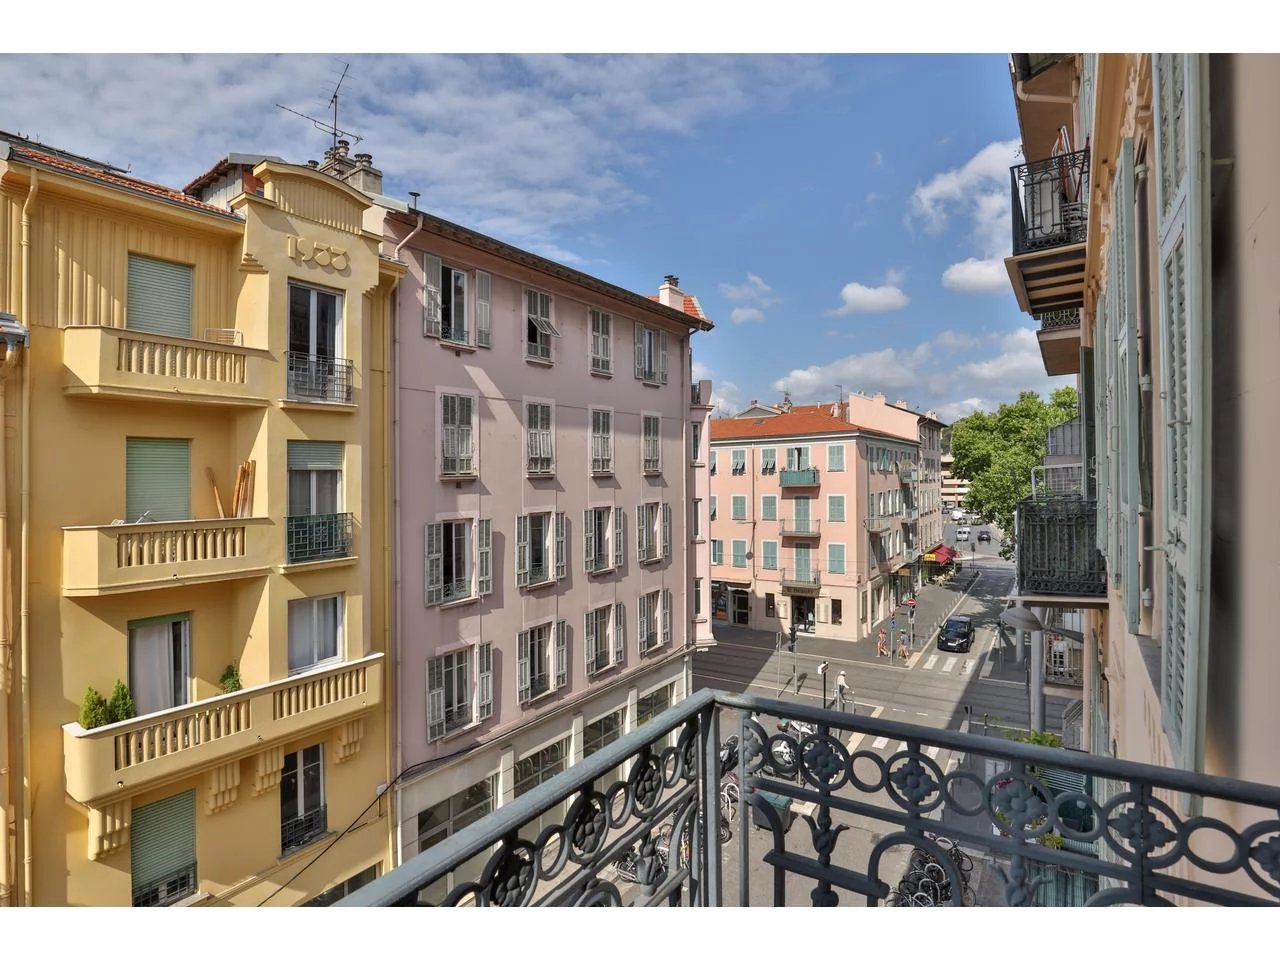 Appartement  2 Rooms 42.12m2  for sale   240 000 €